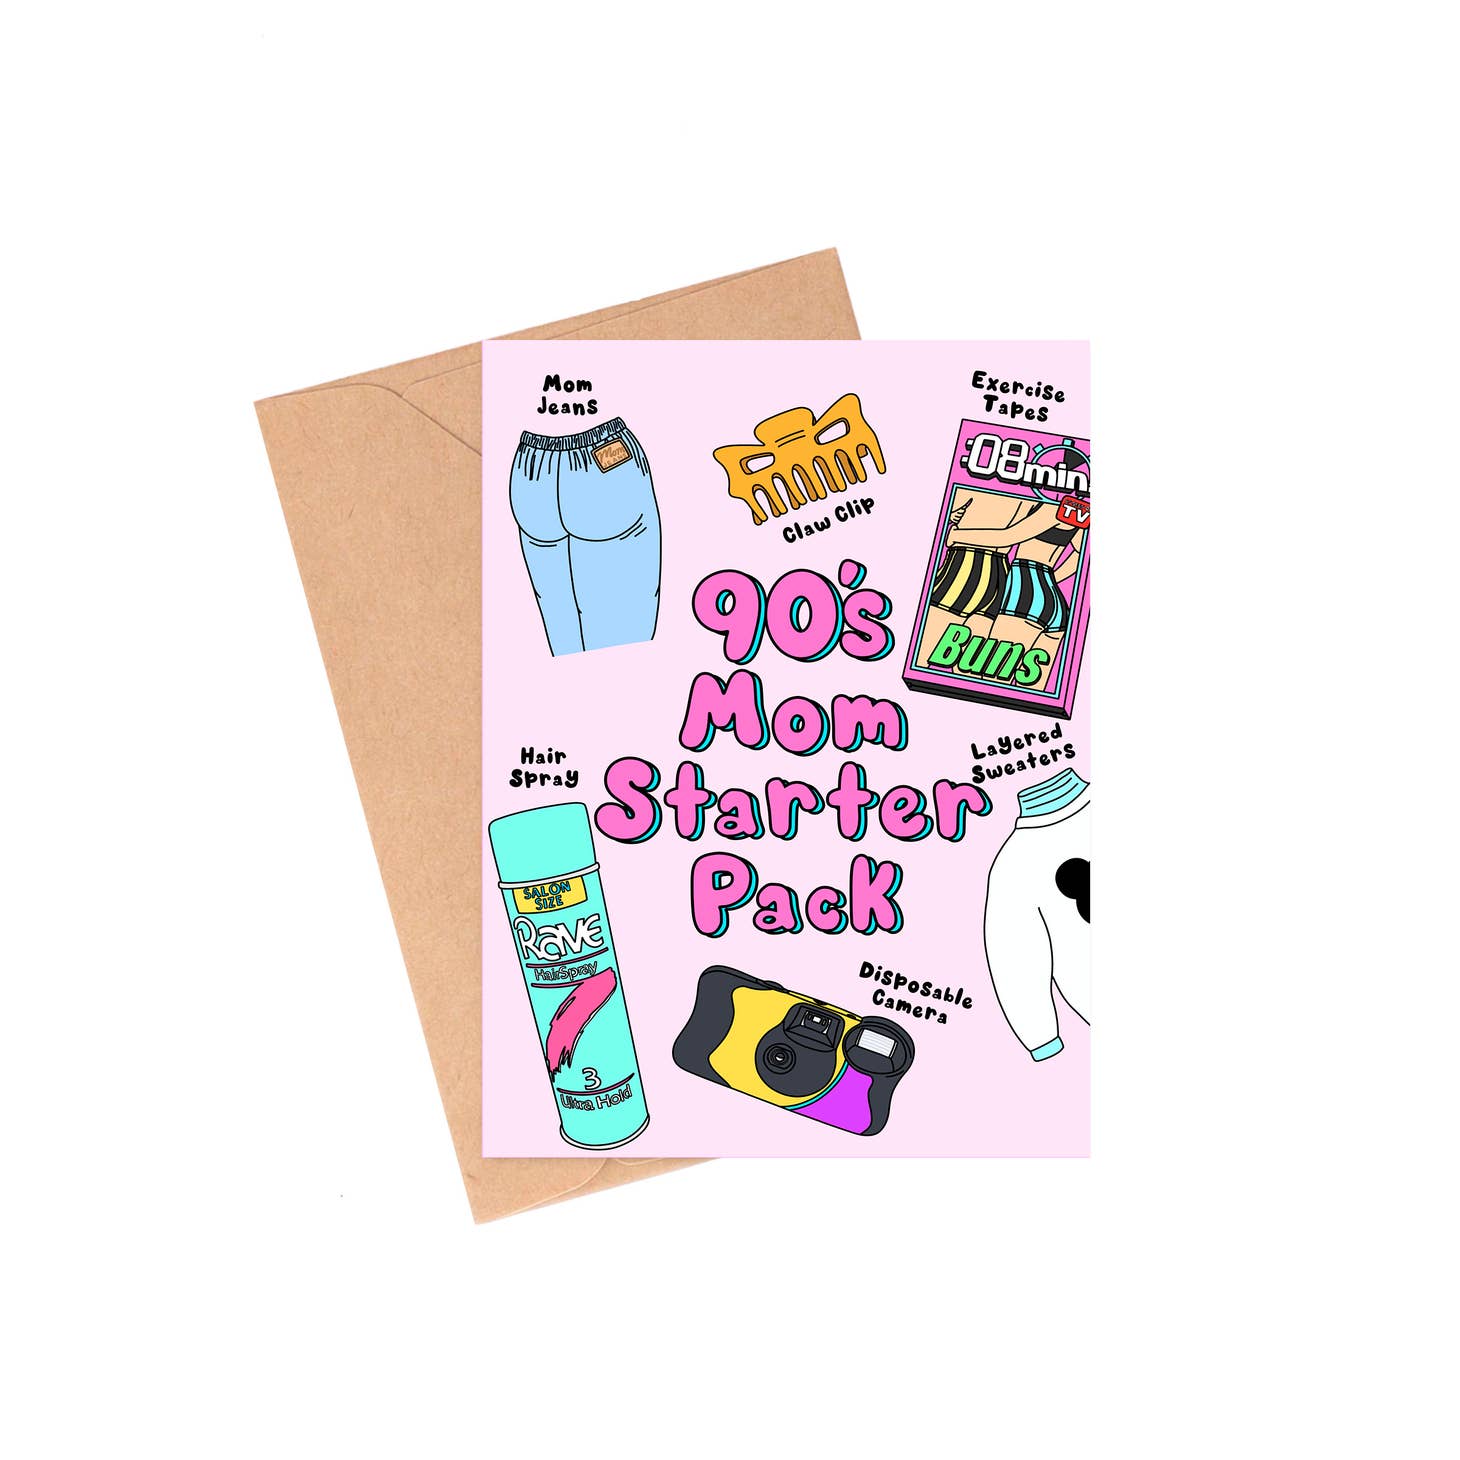 Light pink card with pink text saying, “90’s Mom Starter Pack”. Images of items from the 1990’s such as mom blue jeans, yellow claw hairclip, exercise VHS tape, layered white sweater, blue bottle of hairspray and a disposable camera. A brown envelope is included.